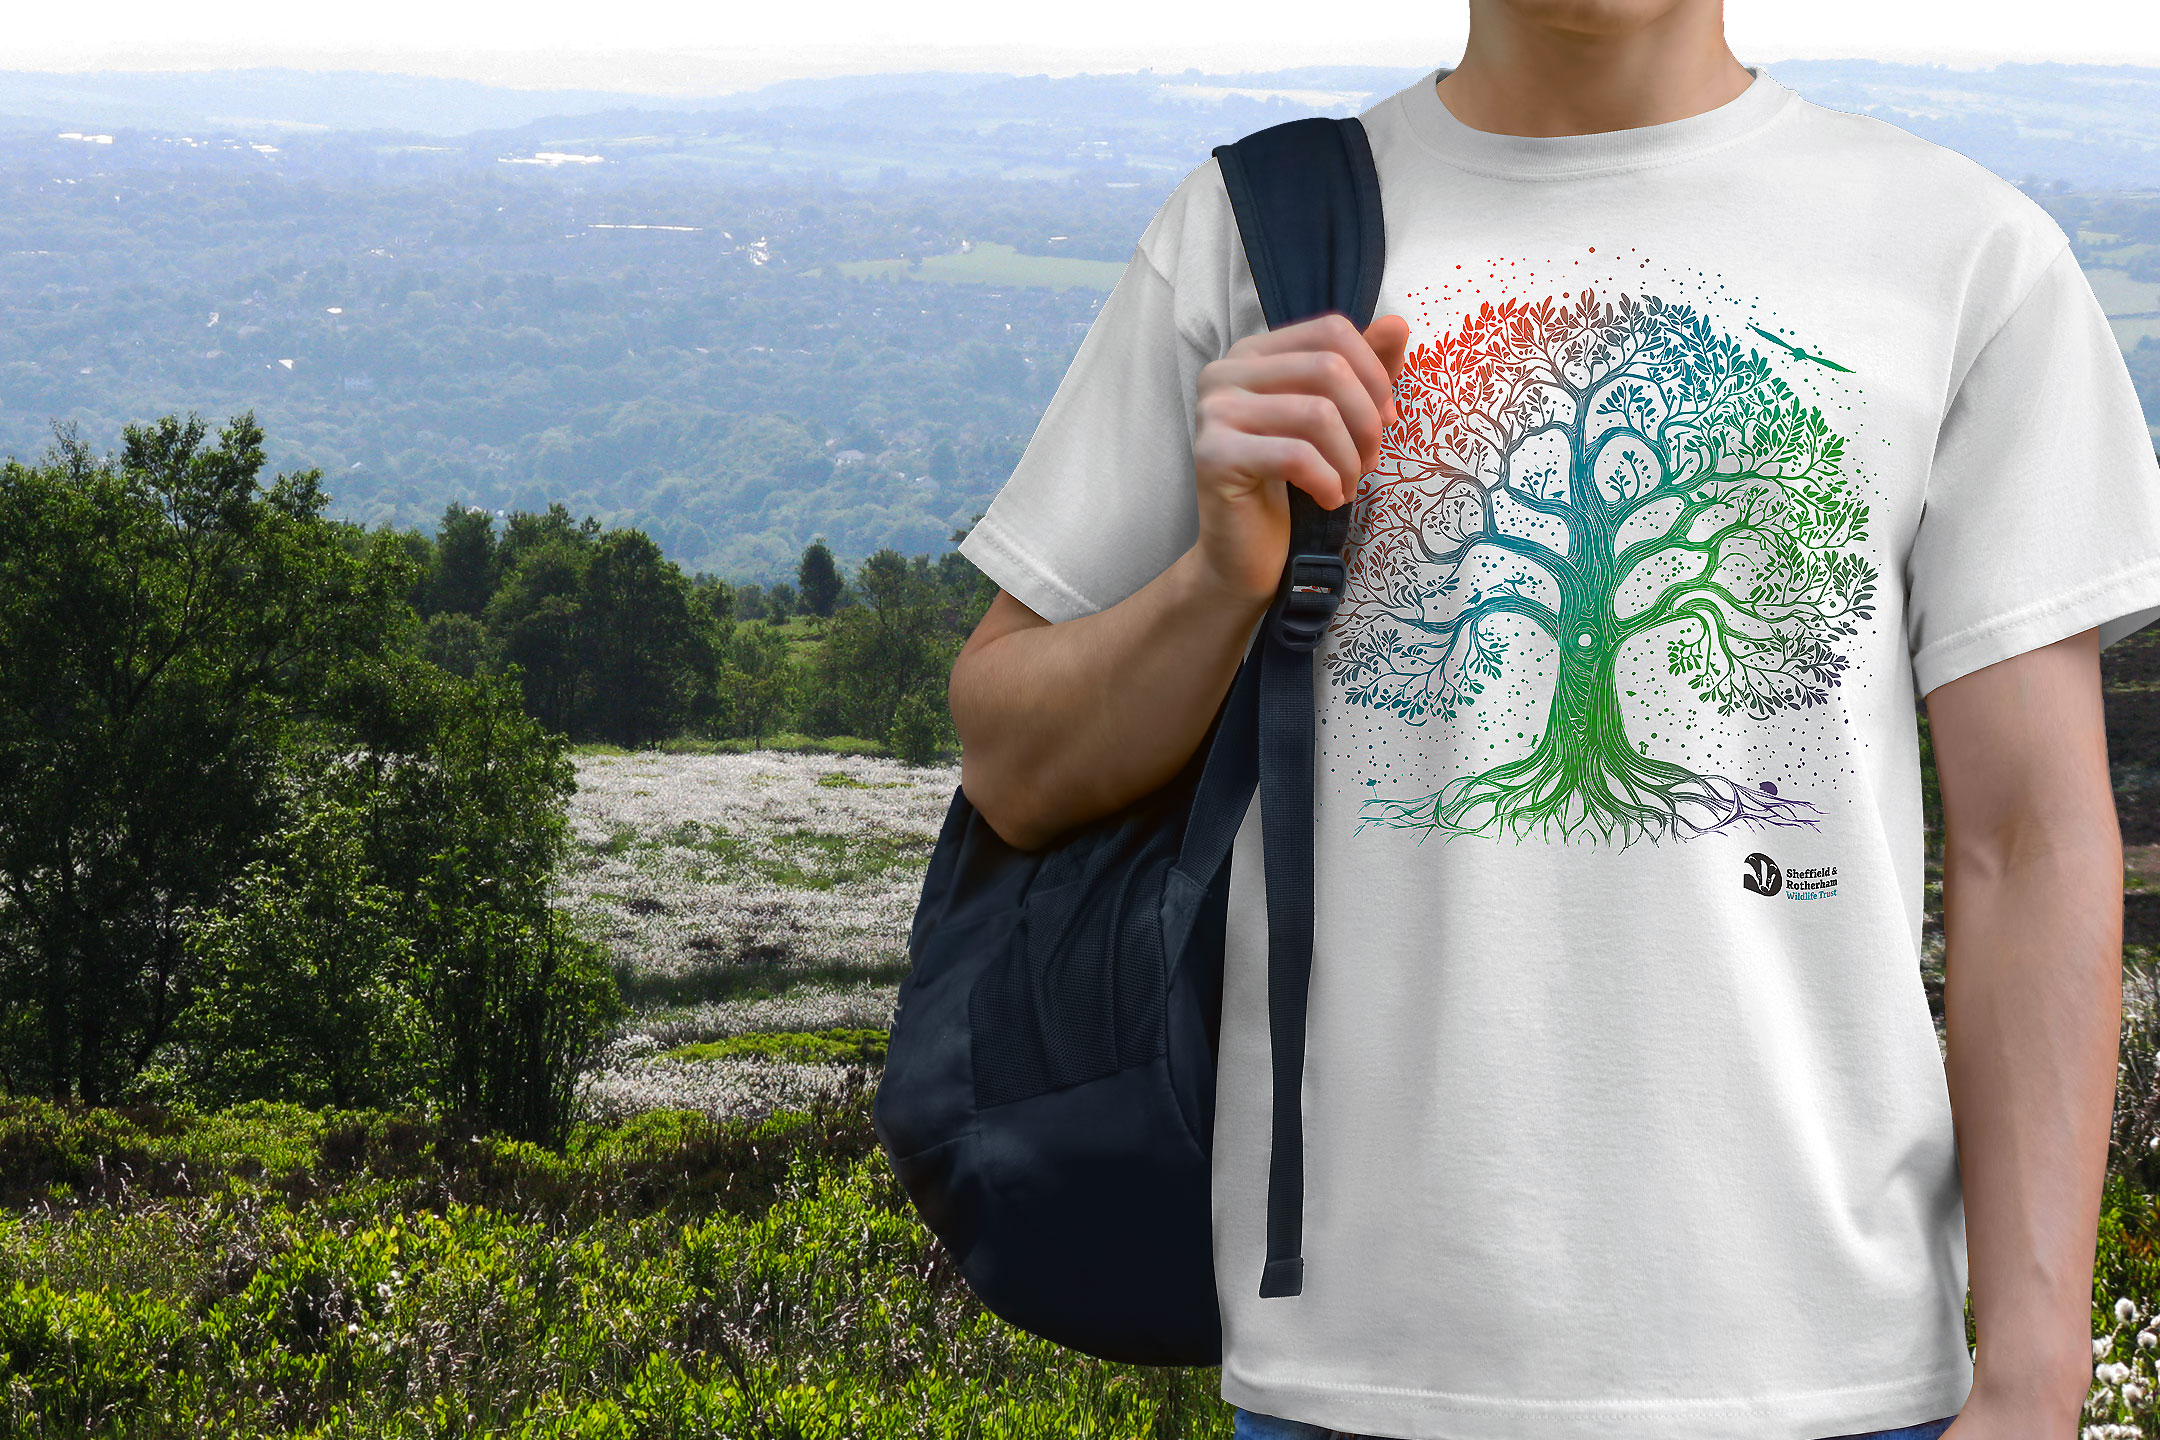 Nature Inspired Tree T-Shirt design by James Hargreaves worn by a walker at Blacka Moor Nature Reserve